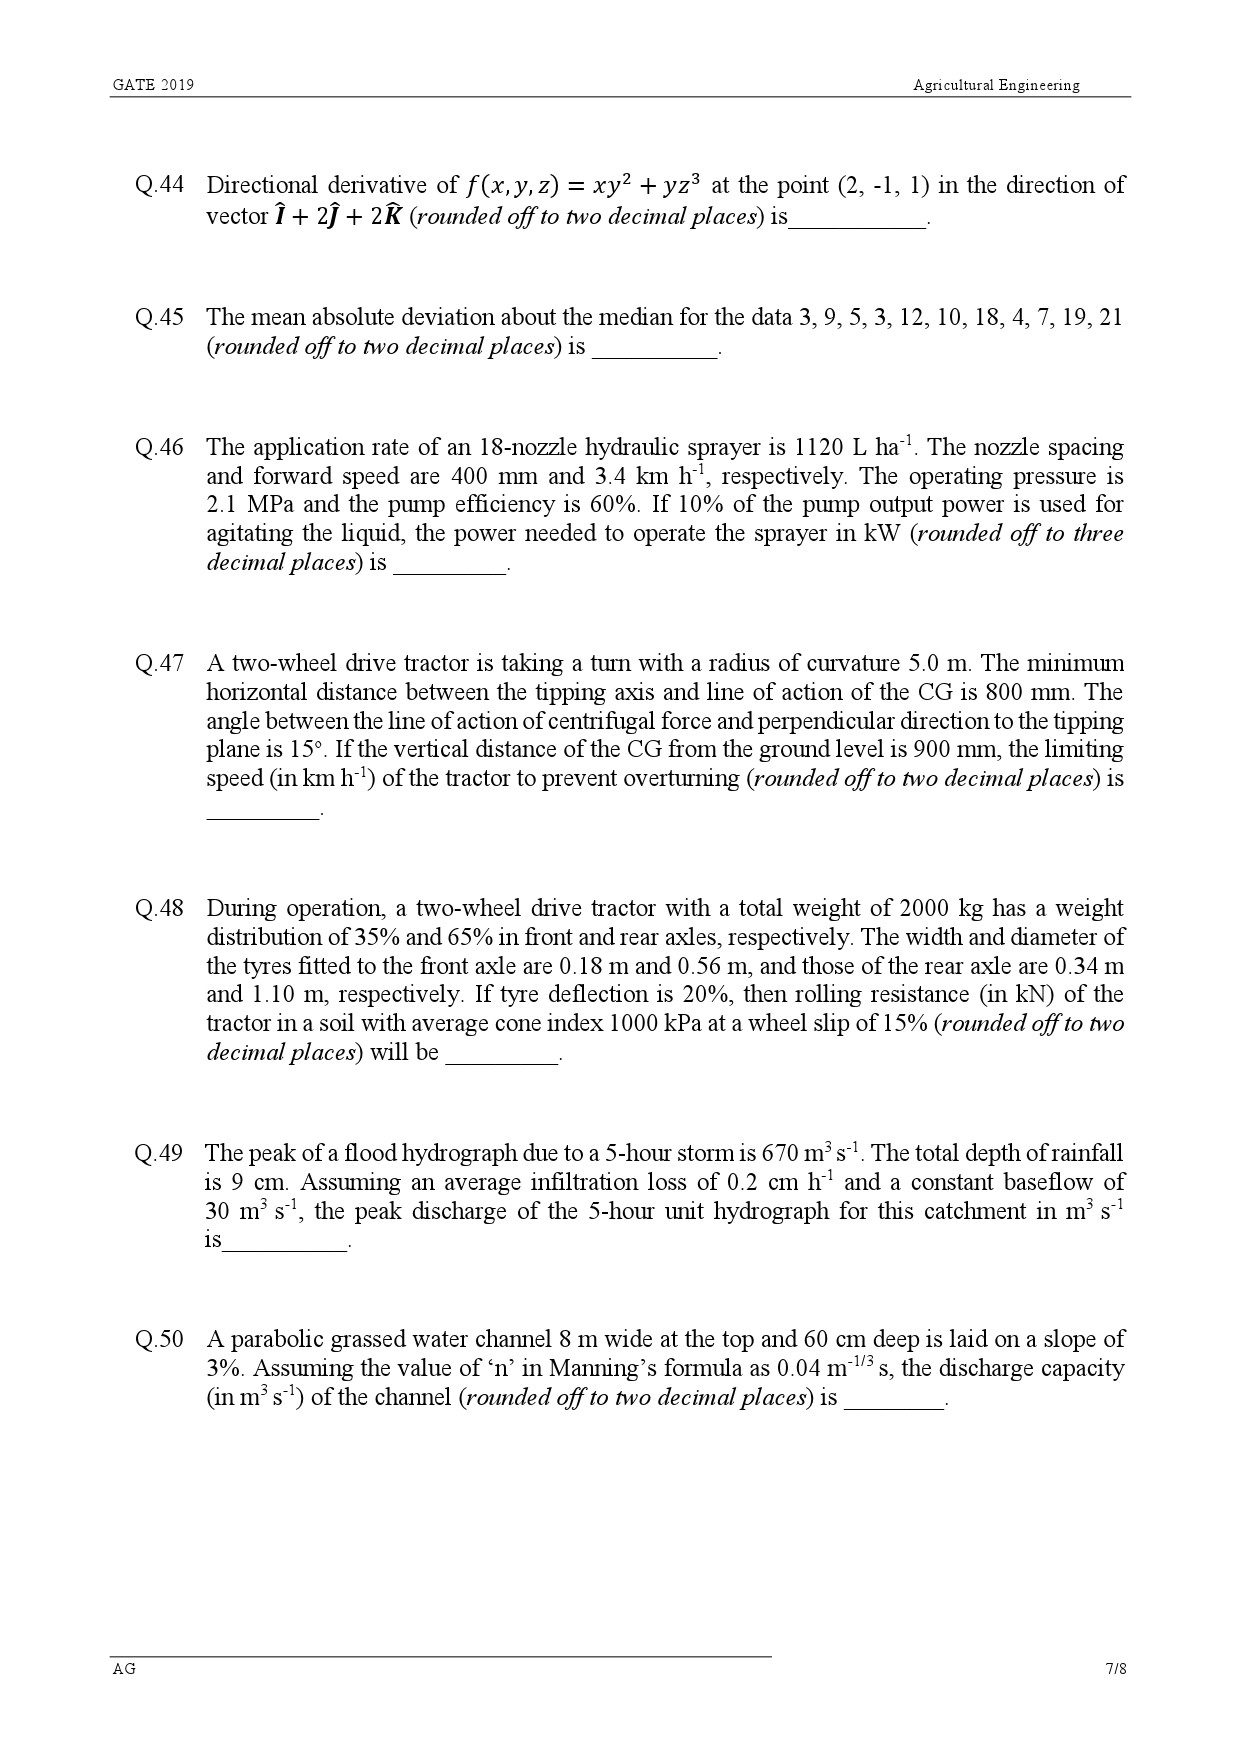 GATE Exam Question Paper 2019 Agricultural Engineering 7